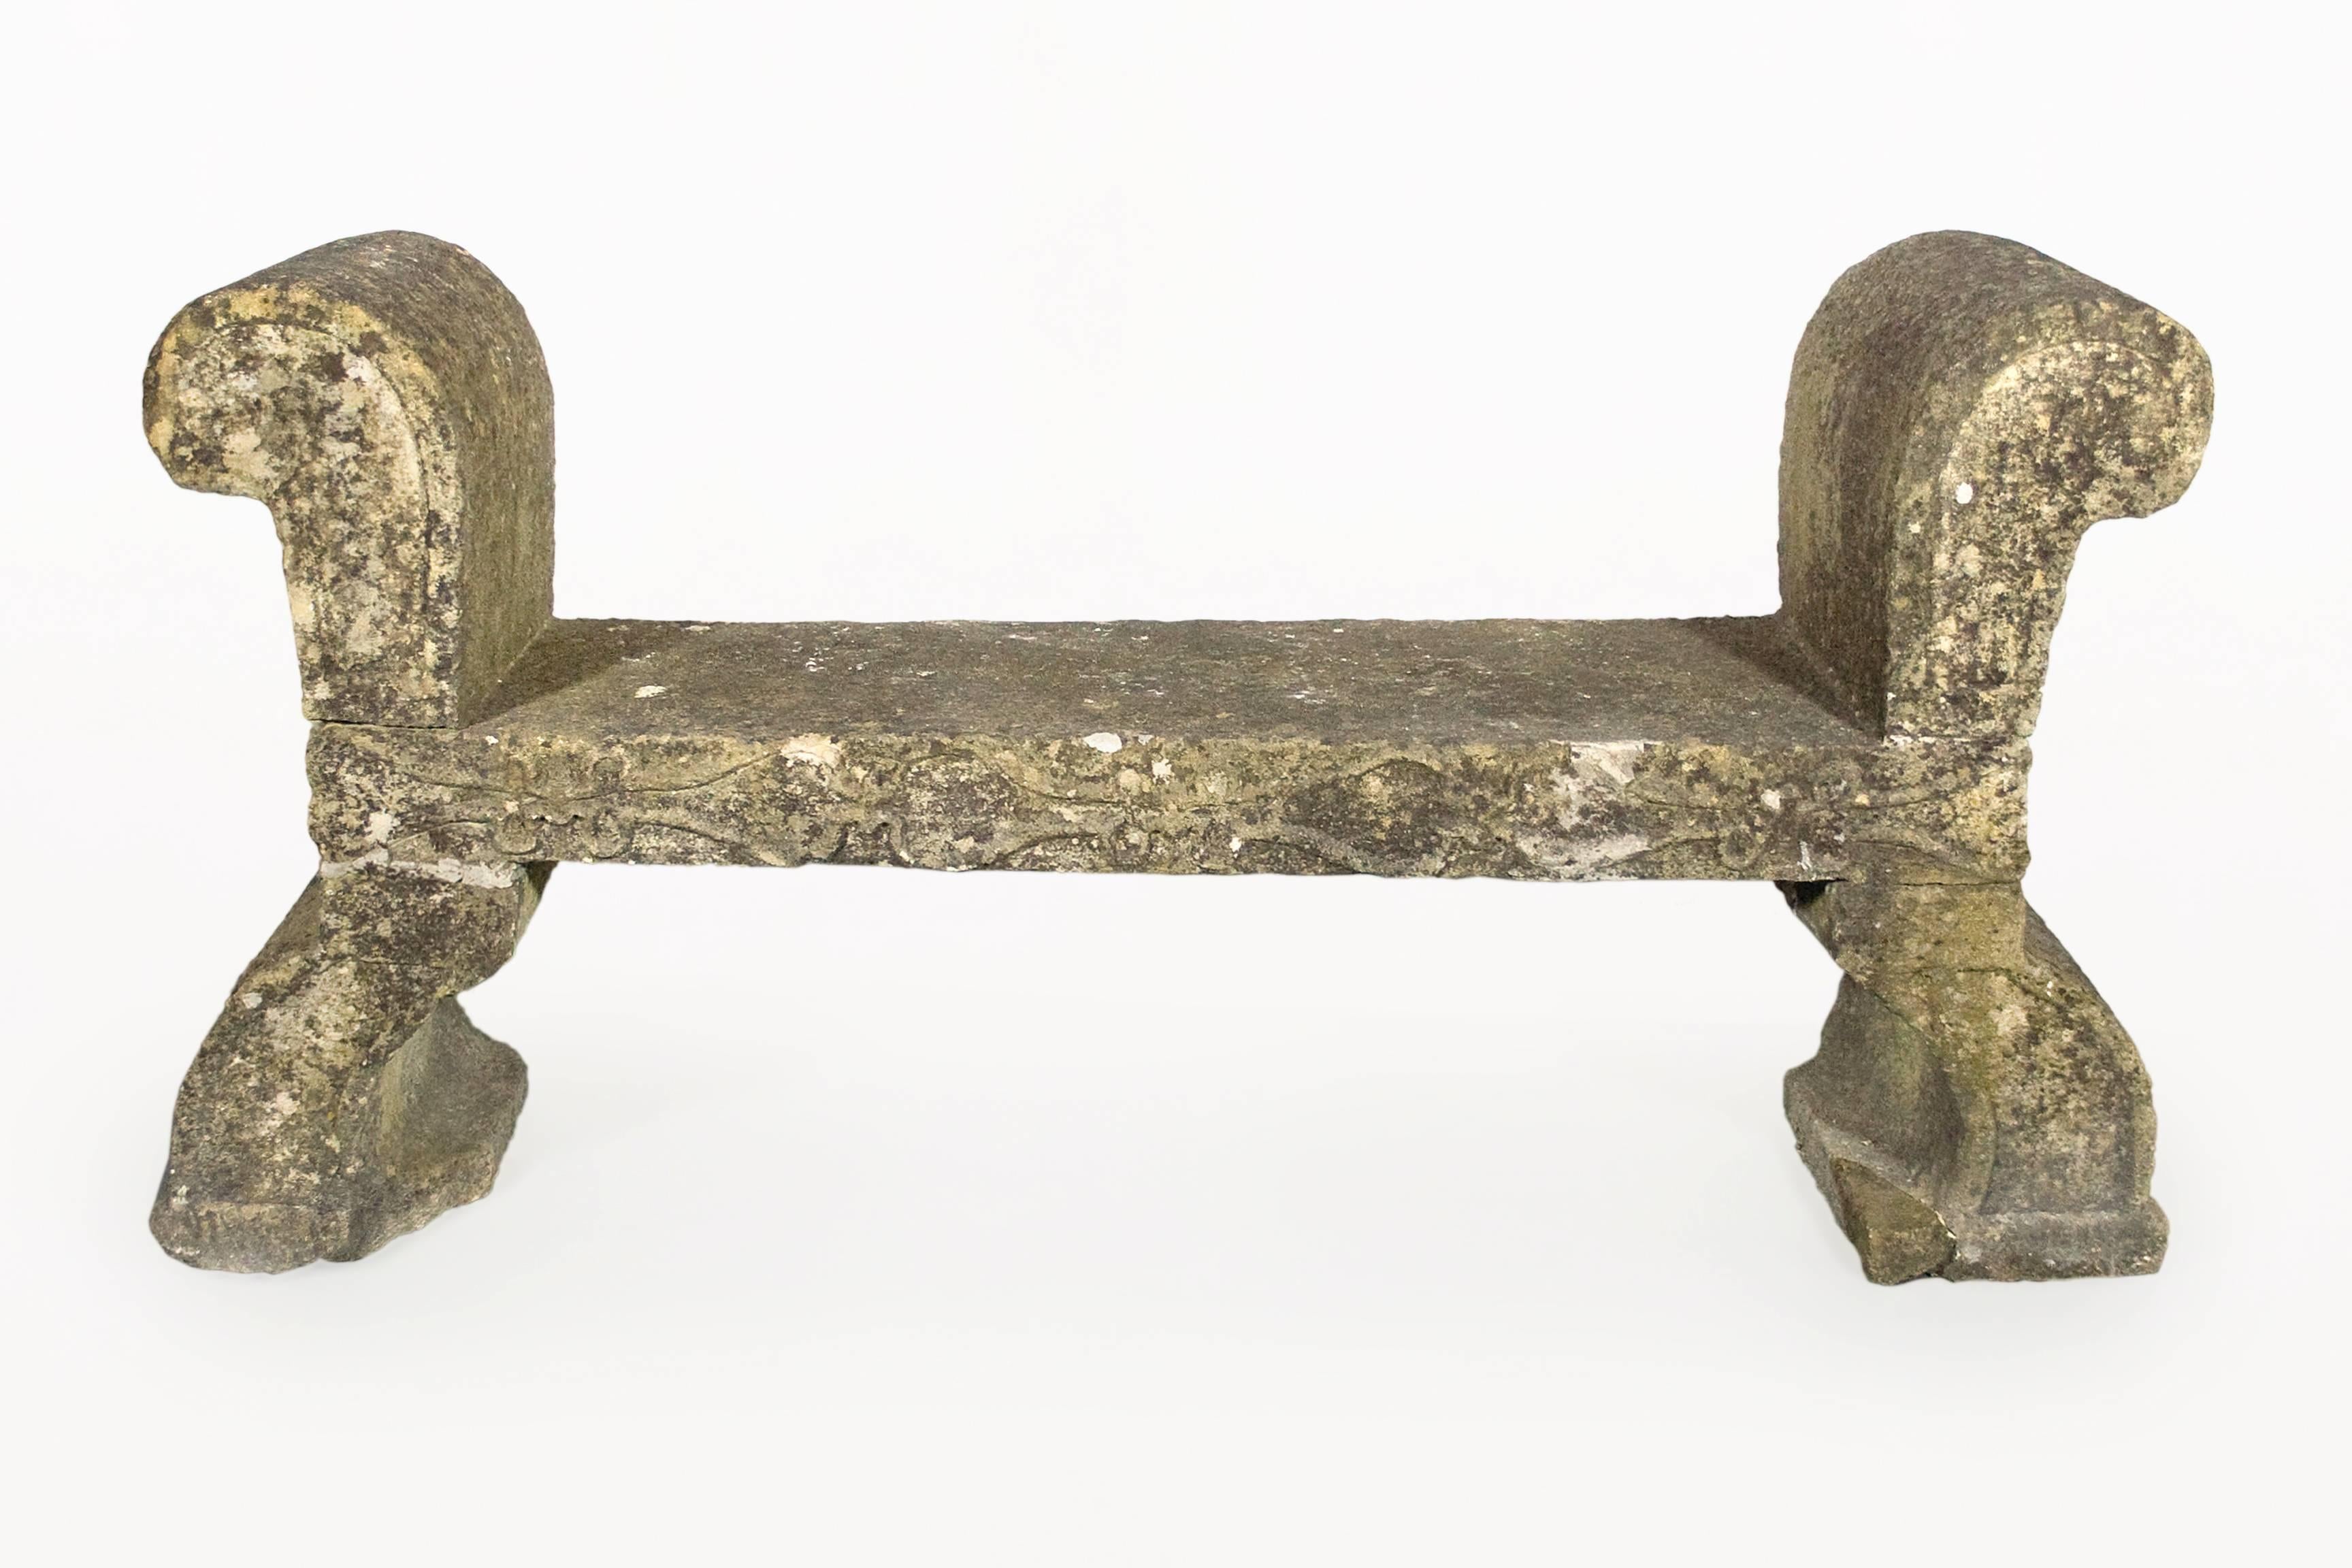 19th century stone bench.
Solid sculpted stone,
circa 1800, England. 
Good vintage condition.